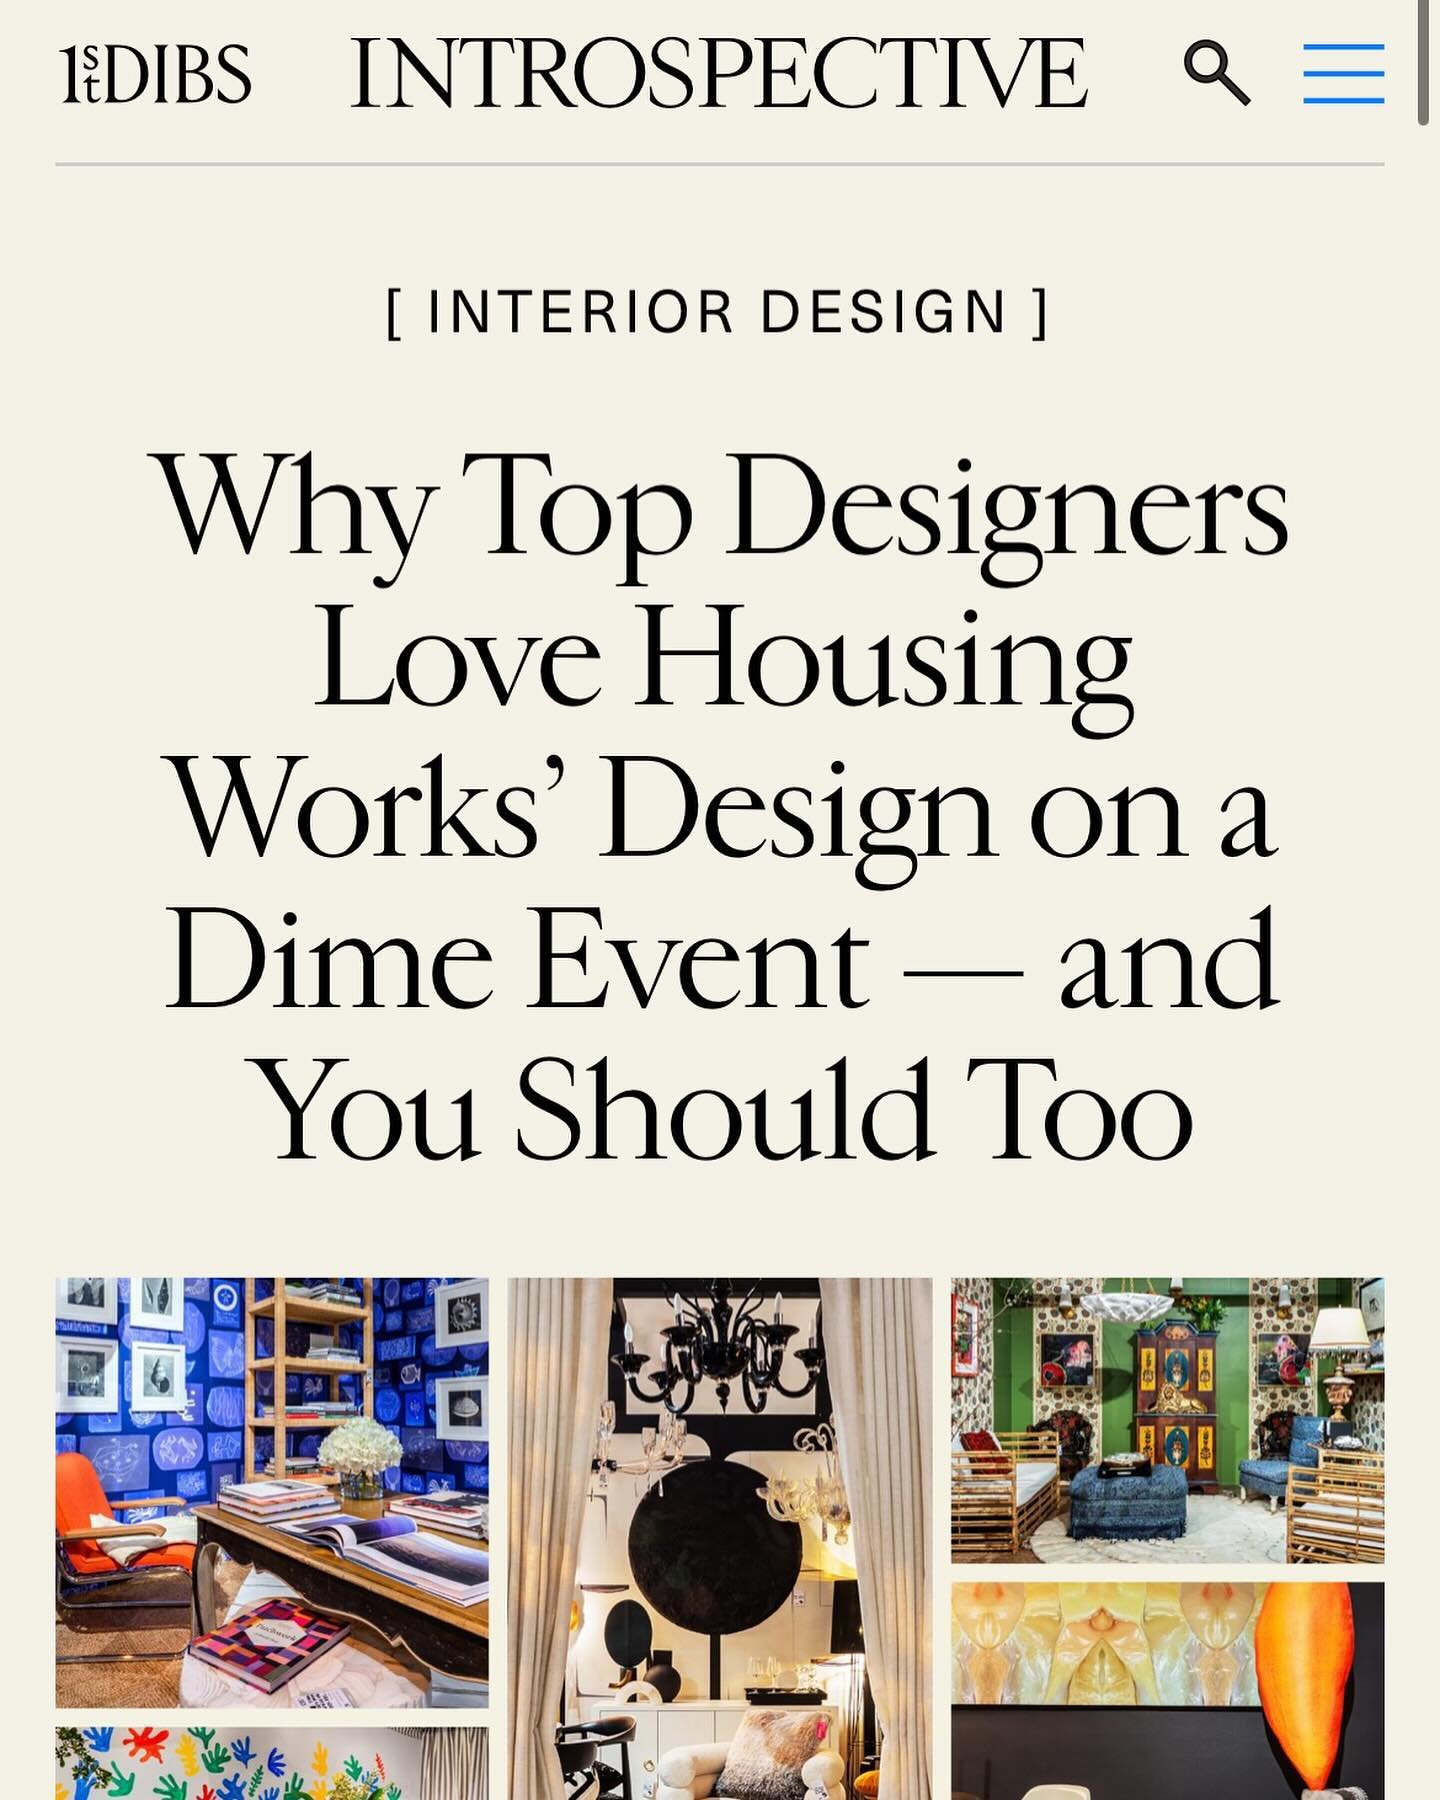 Countdown is on! ⏱️ So thankful to 1st Dibs for this incredible feature on Design on a Dime especially to @tony1stdibs and @jsawriter. I&rsquo;m grateful to all the amazingly talented designers and generous contributions. 

Link to the article and ti